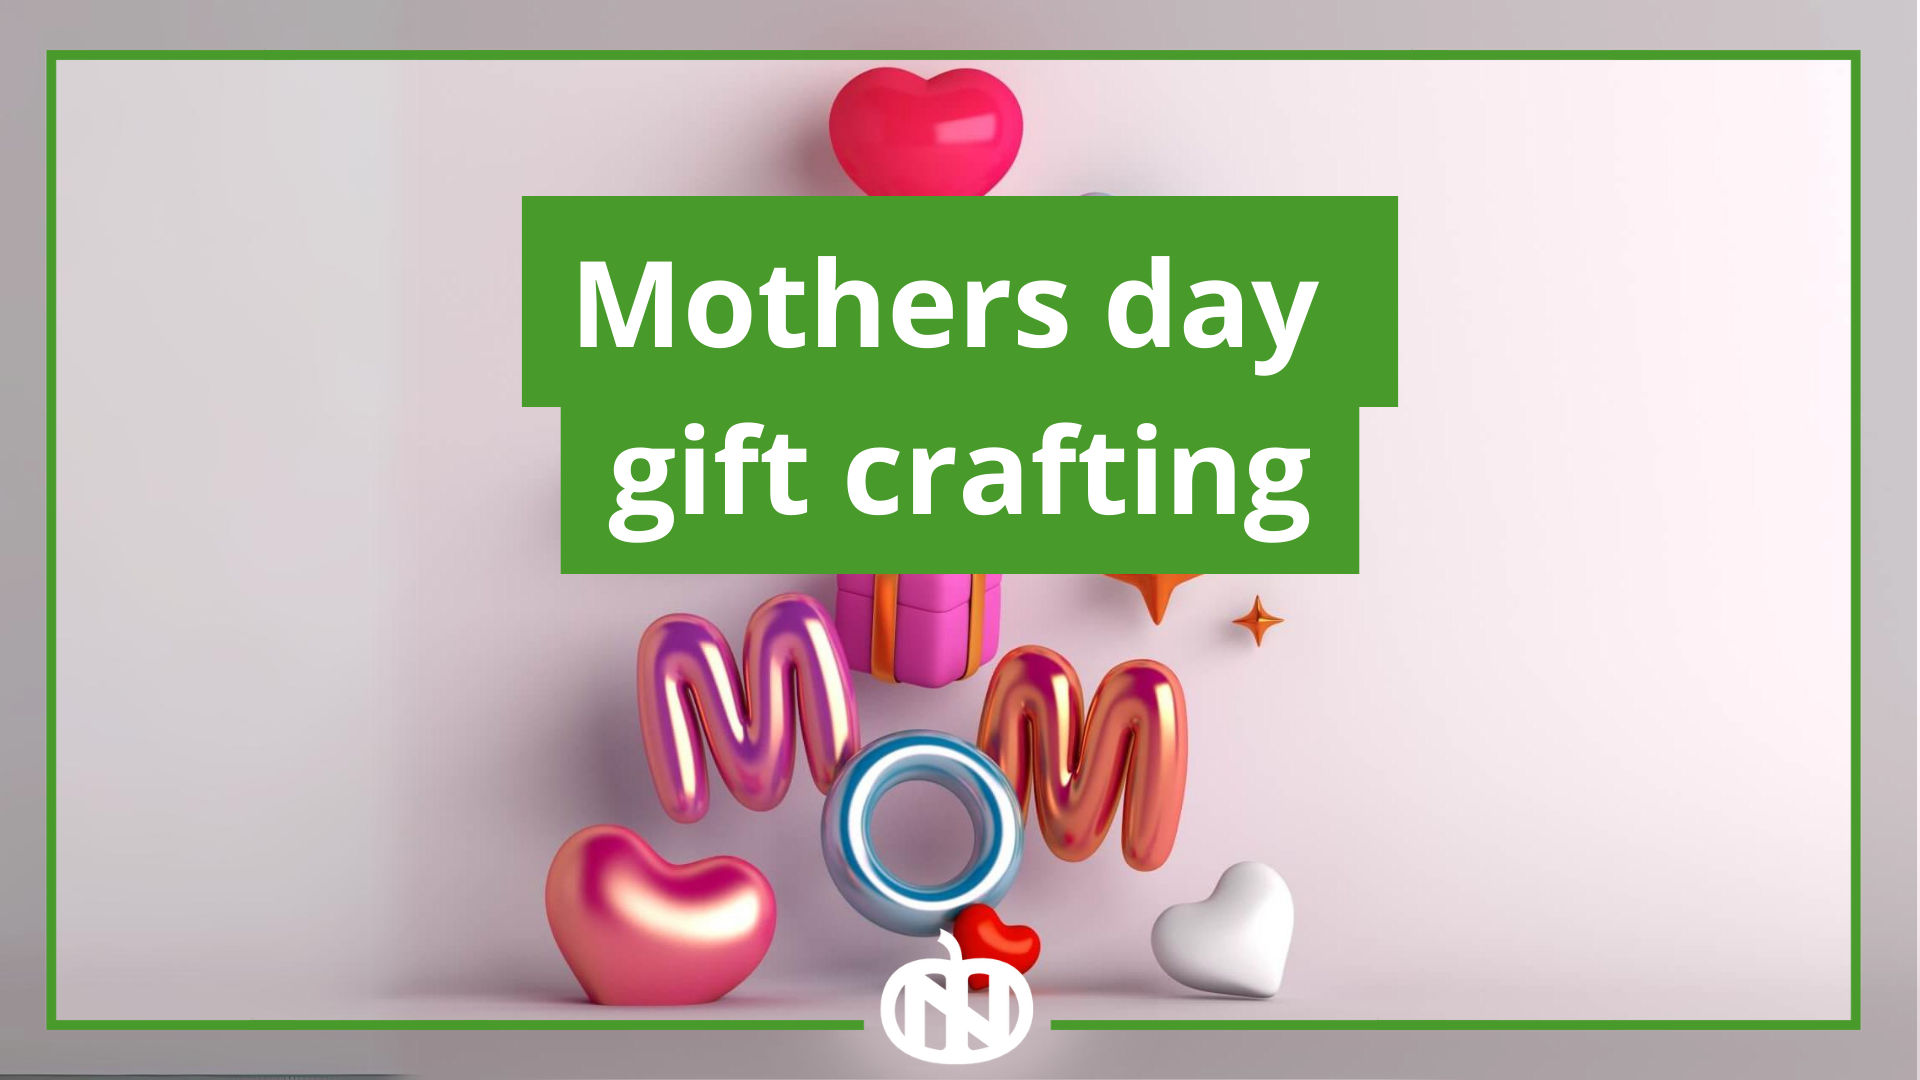 Mothersday crafts afternoon